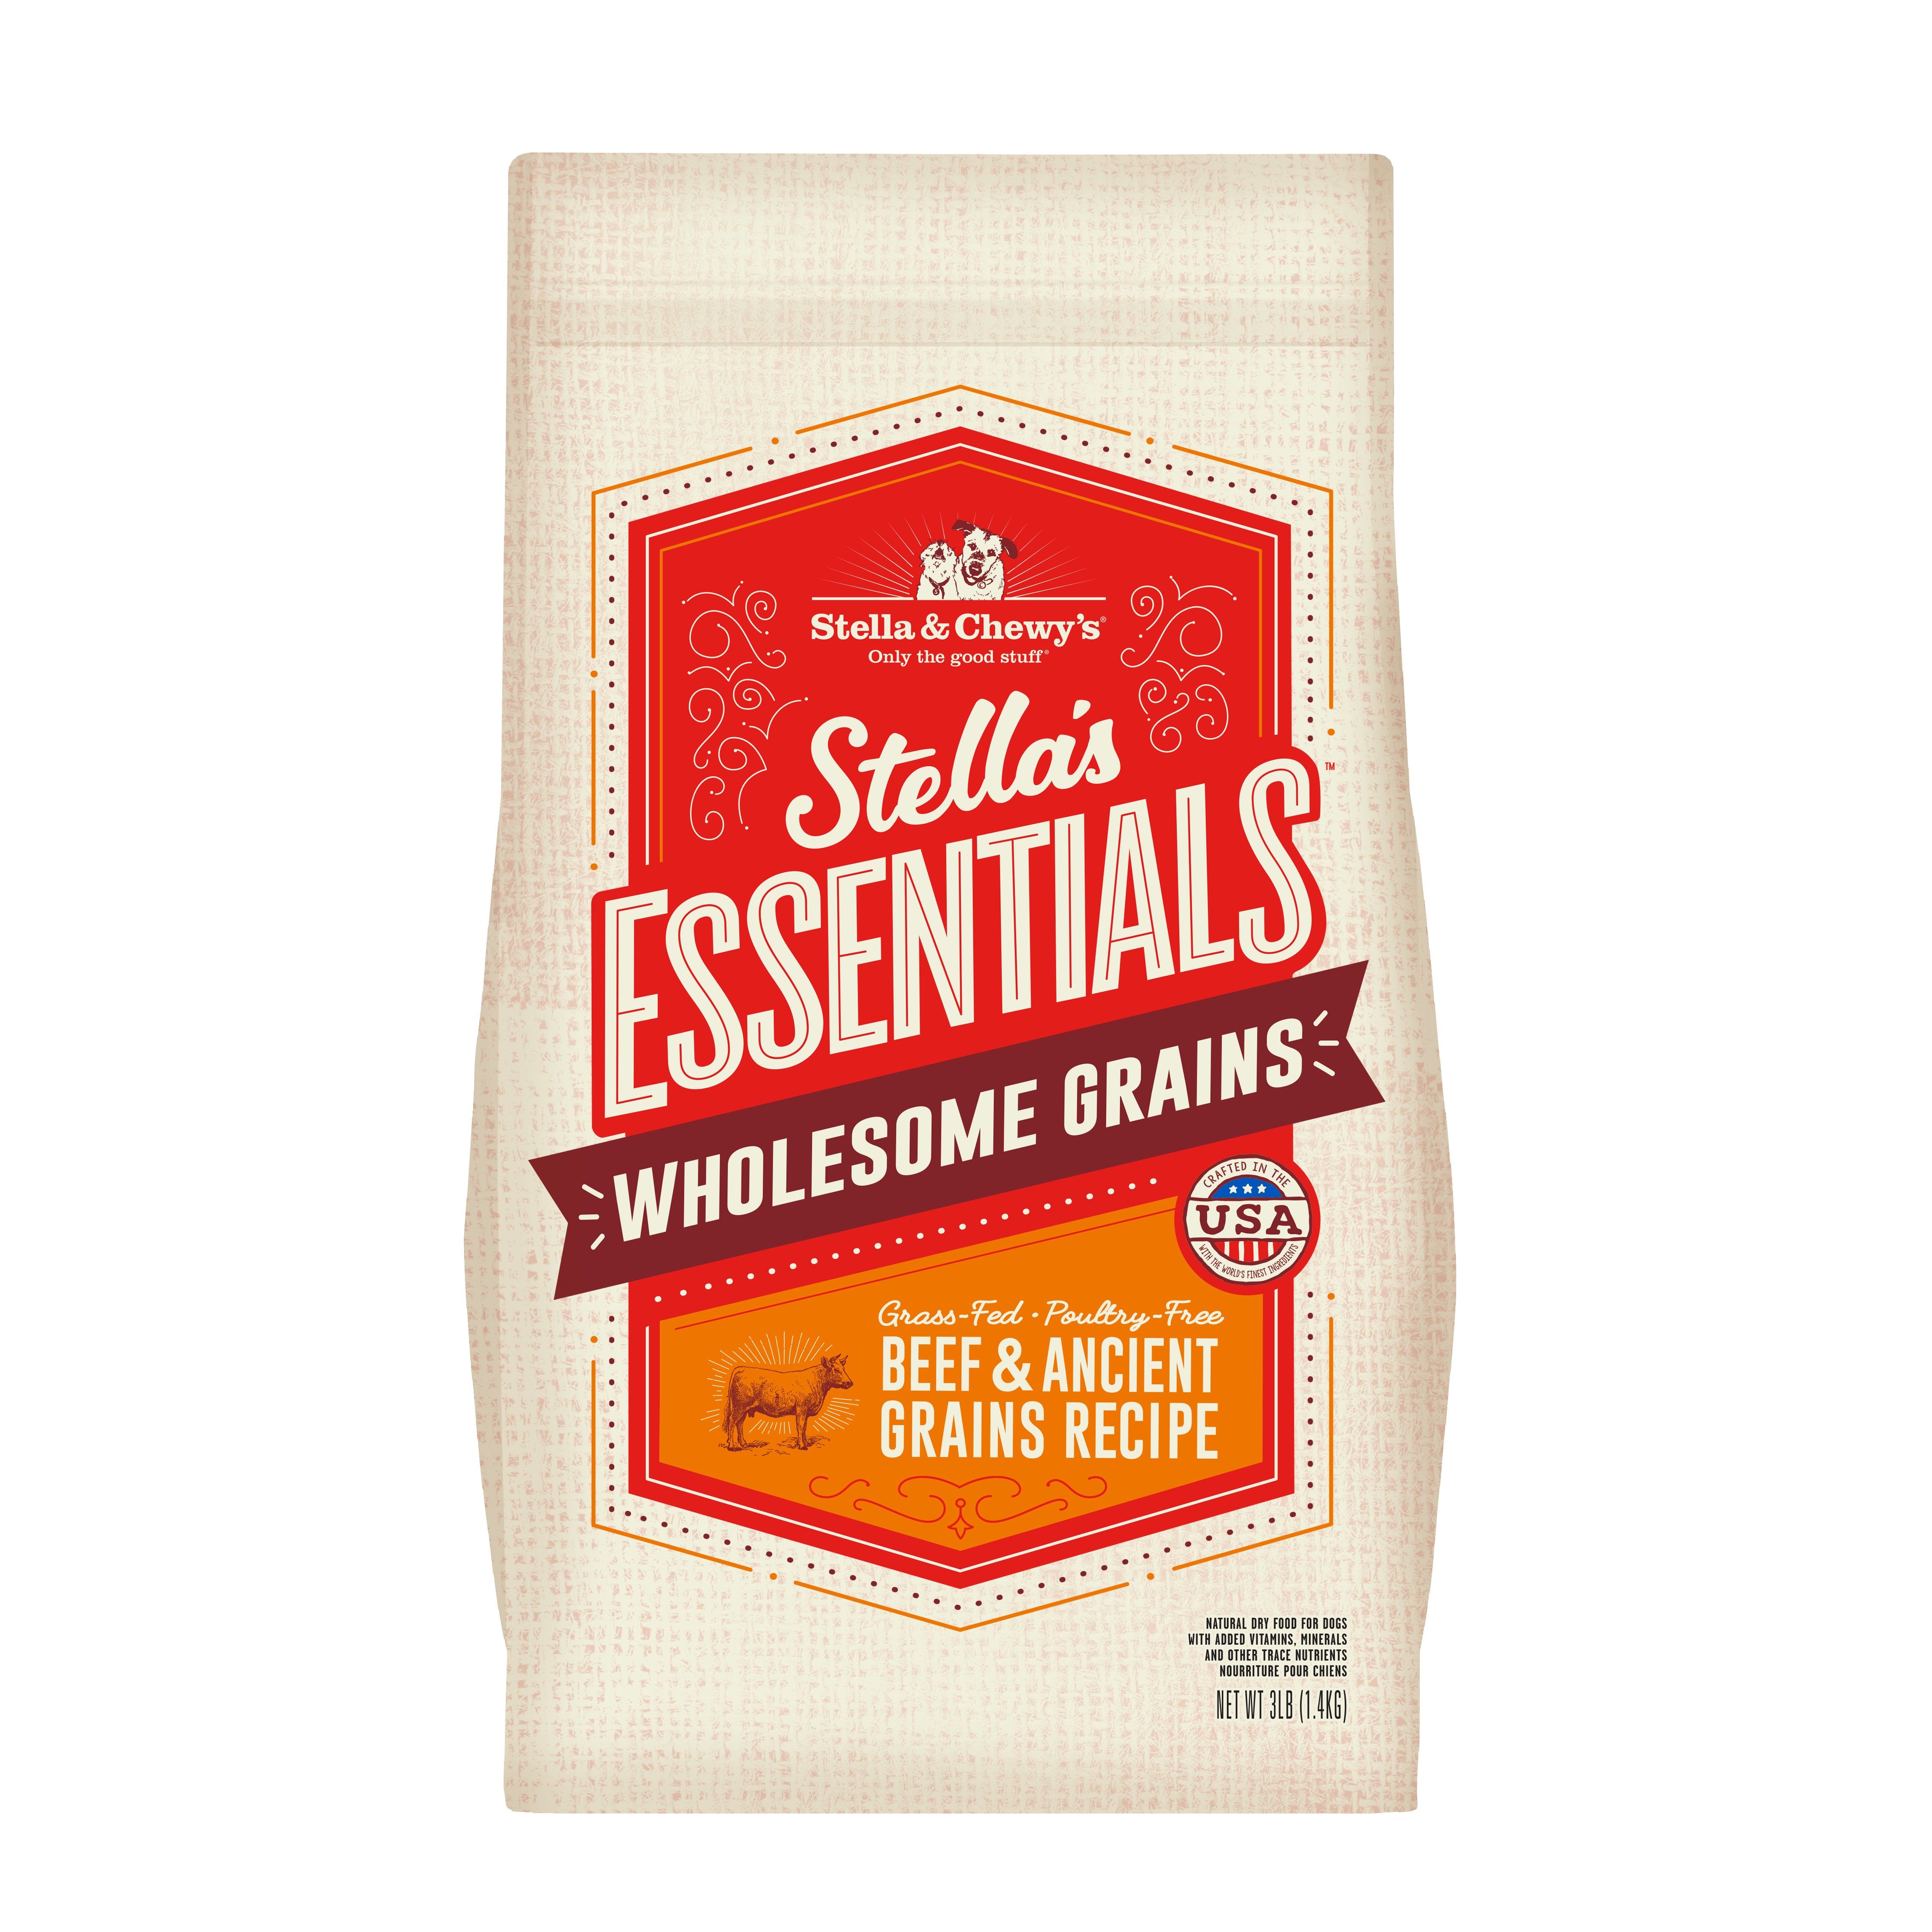 Stella & Chewy's Essentials Beef & Ancient Grains Dry Dog Food